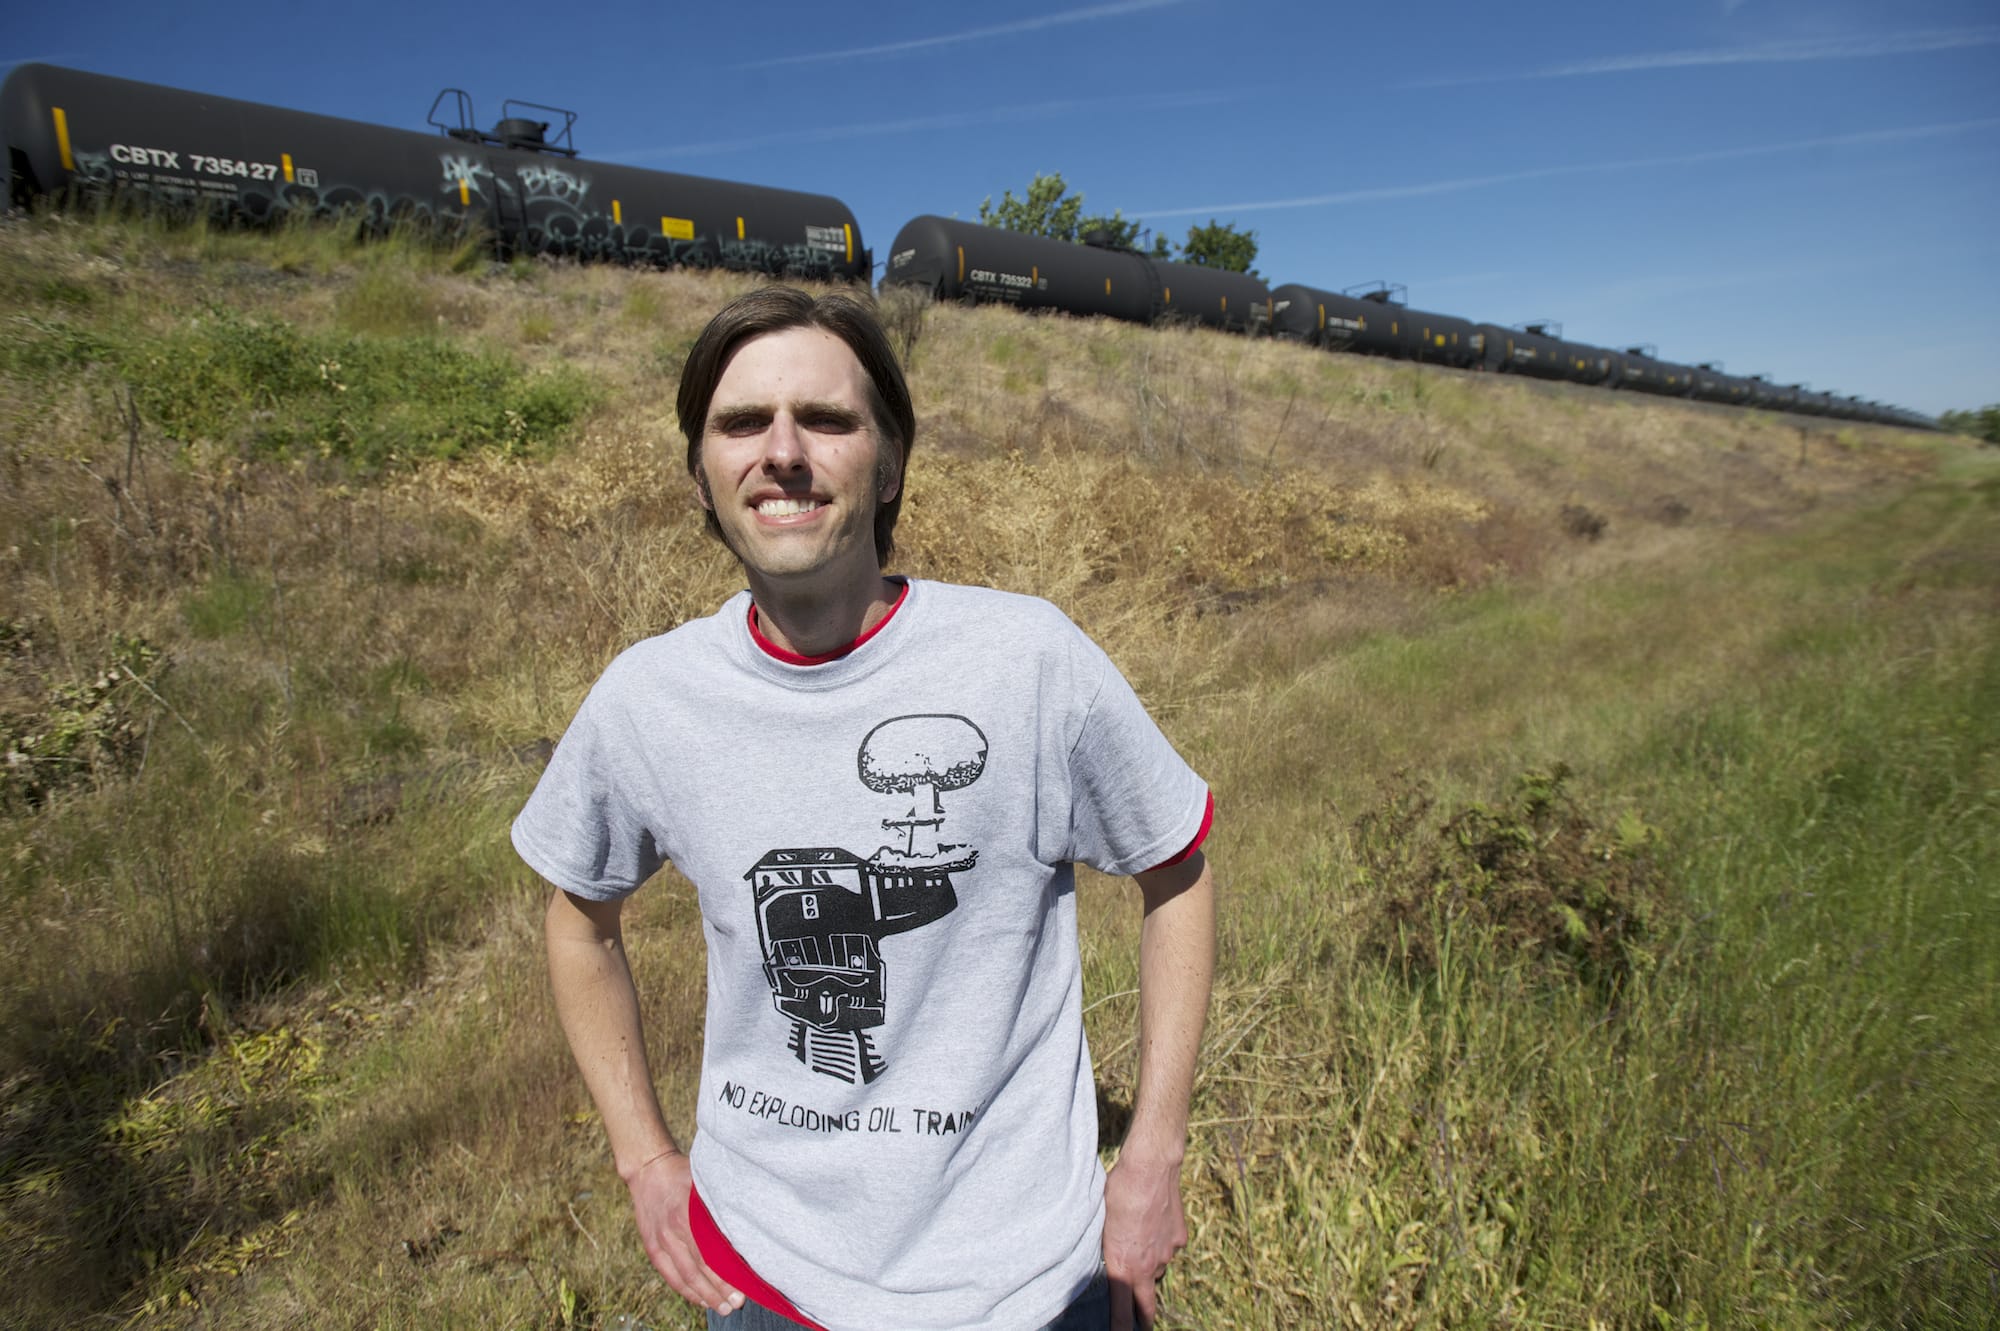 Matt Landon of Vancouver Action Network, shown Friday, has been leading efforts to track oil trains, including using rented equipment to record vapor emissions from tank cars and keeping tabs on the types of hazardous-materials trains, as shown by placards attached to the cars.